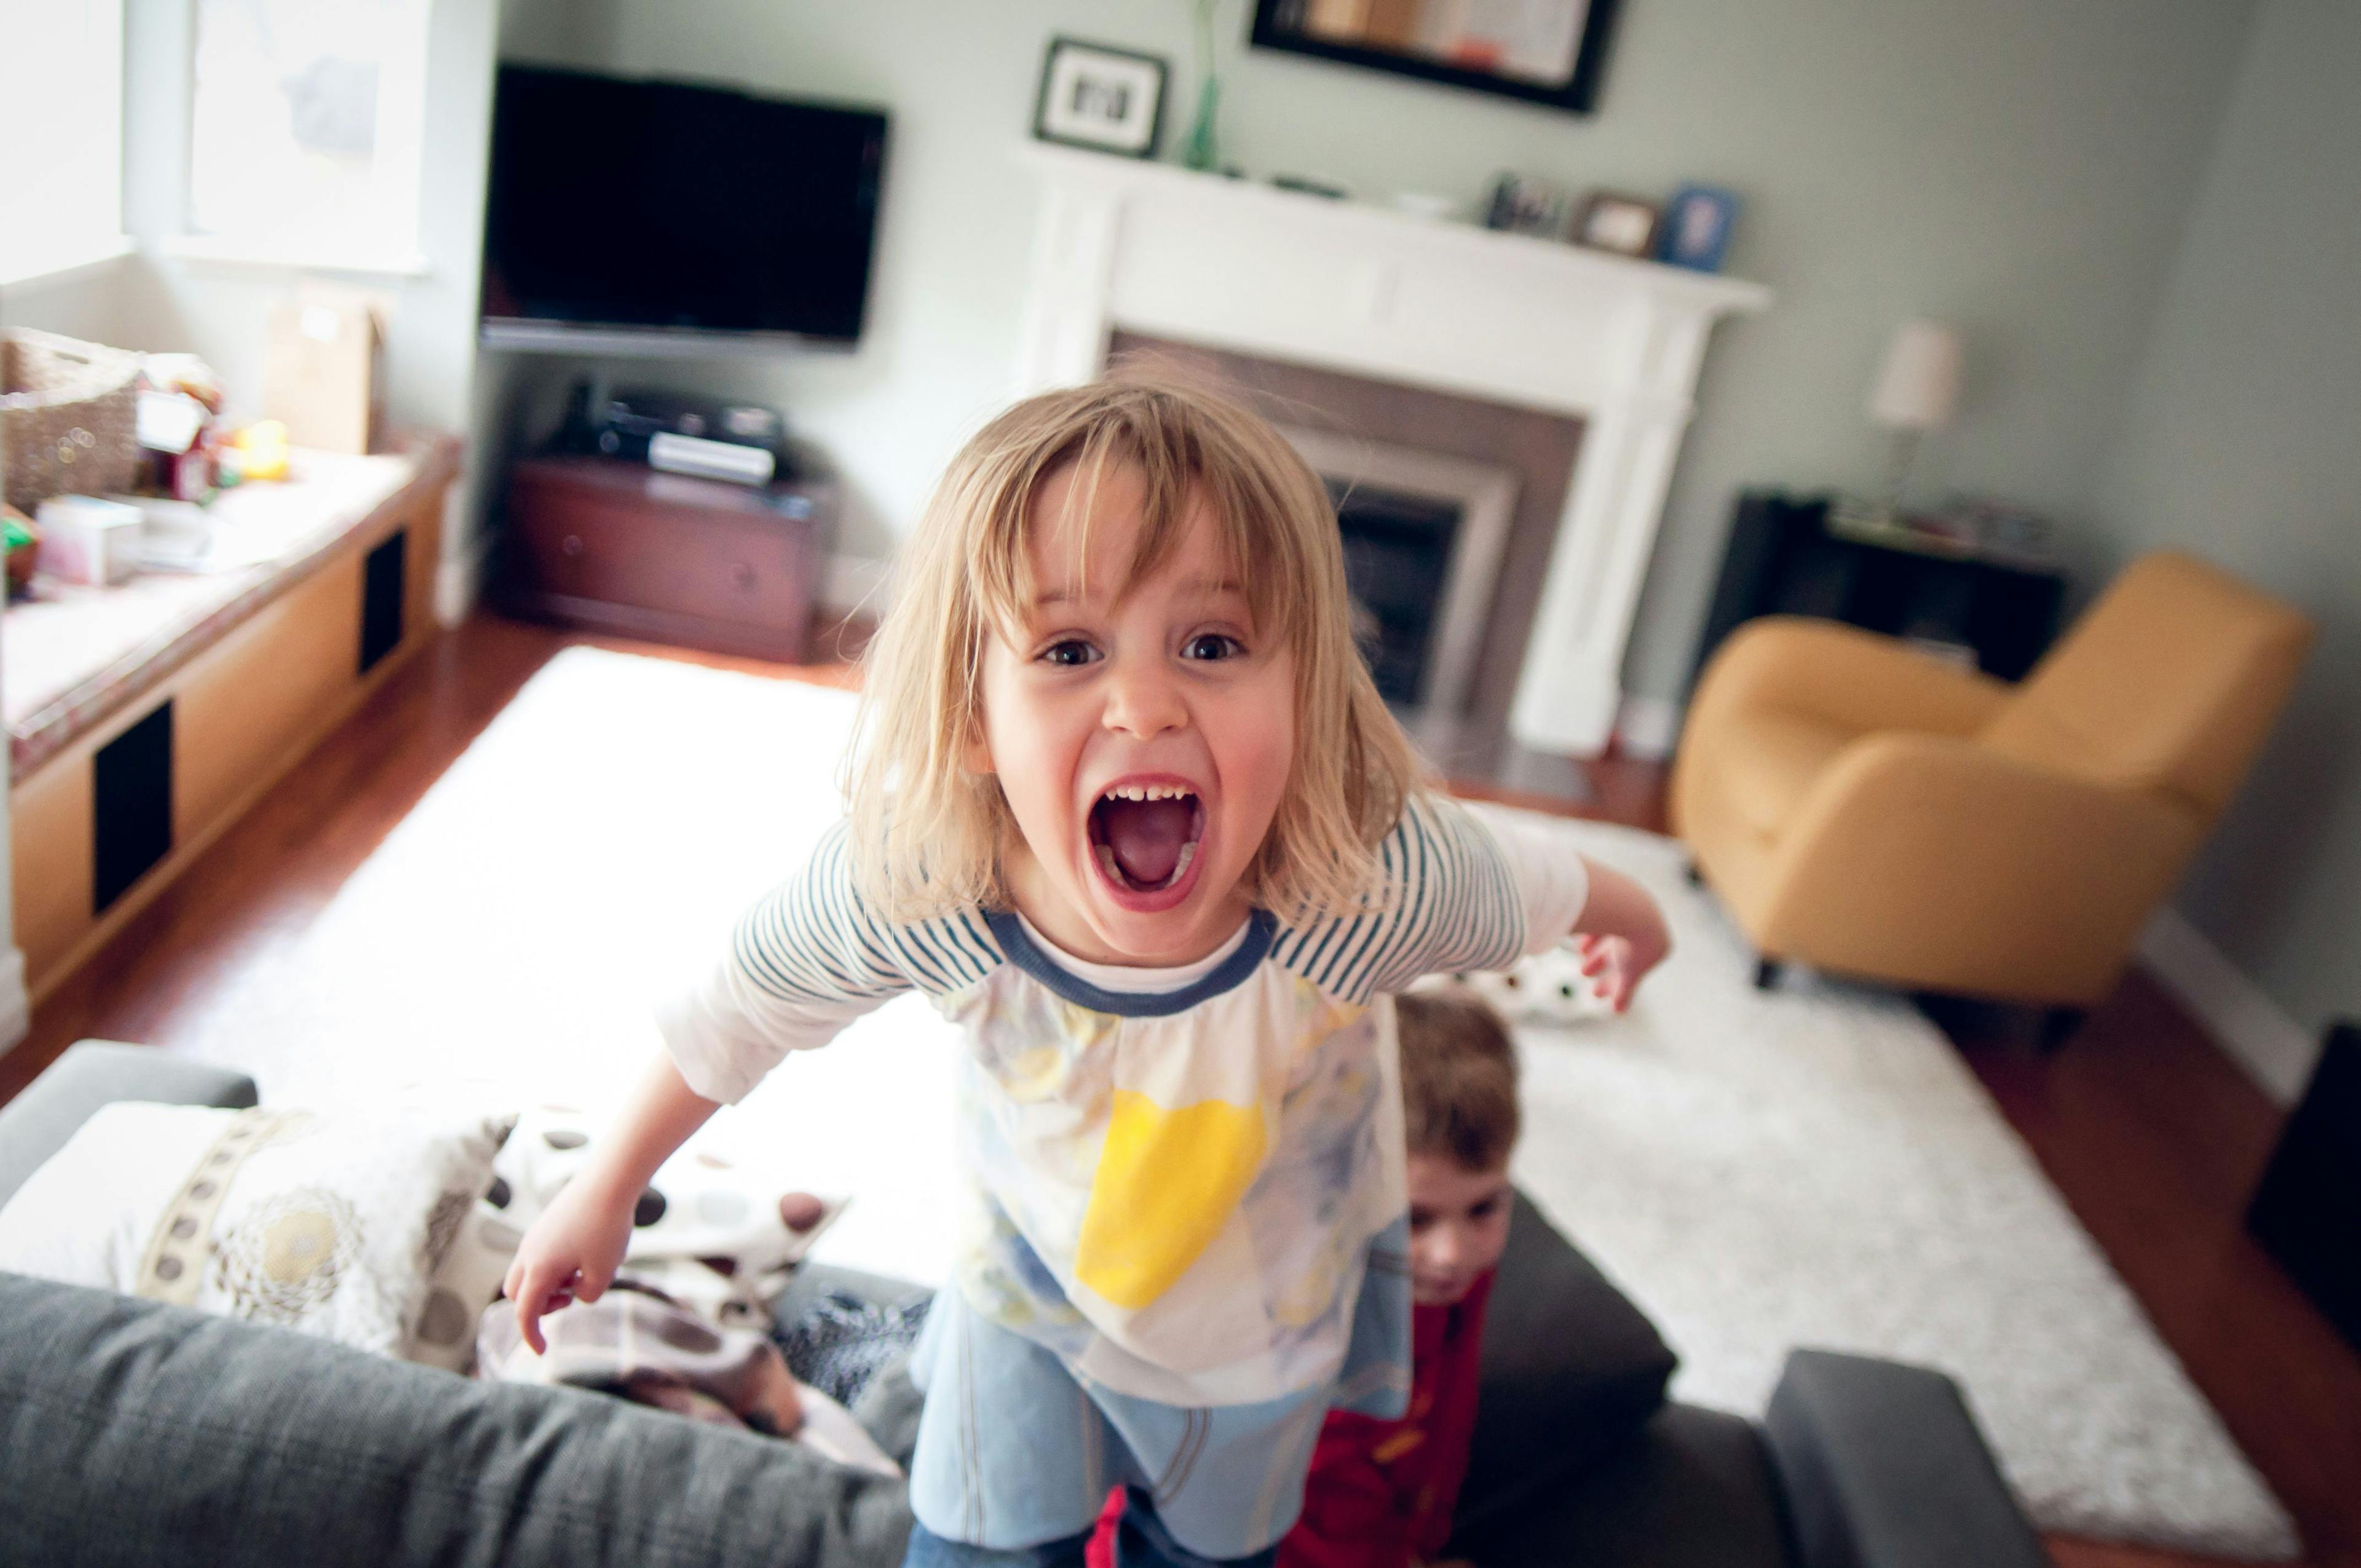 A young kid screams on a couch